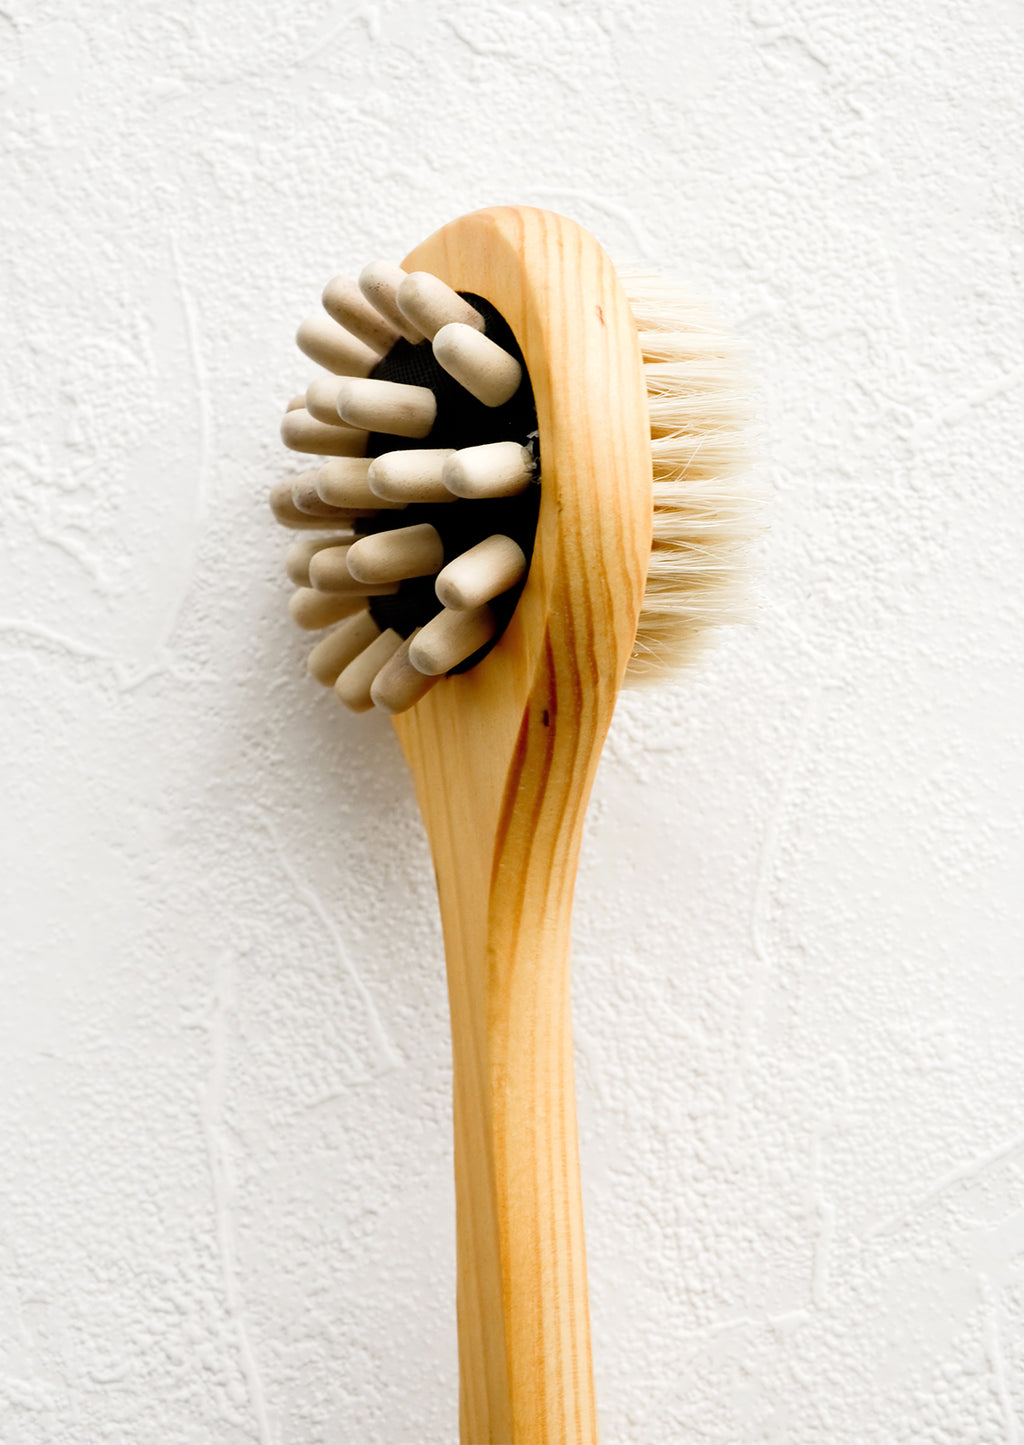 2: A two-sided wooden shower brush with wooden massager pegs on one side and boar bristle on the other.